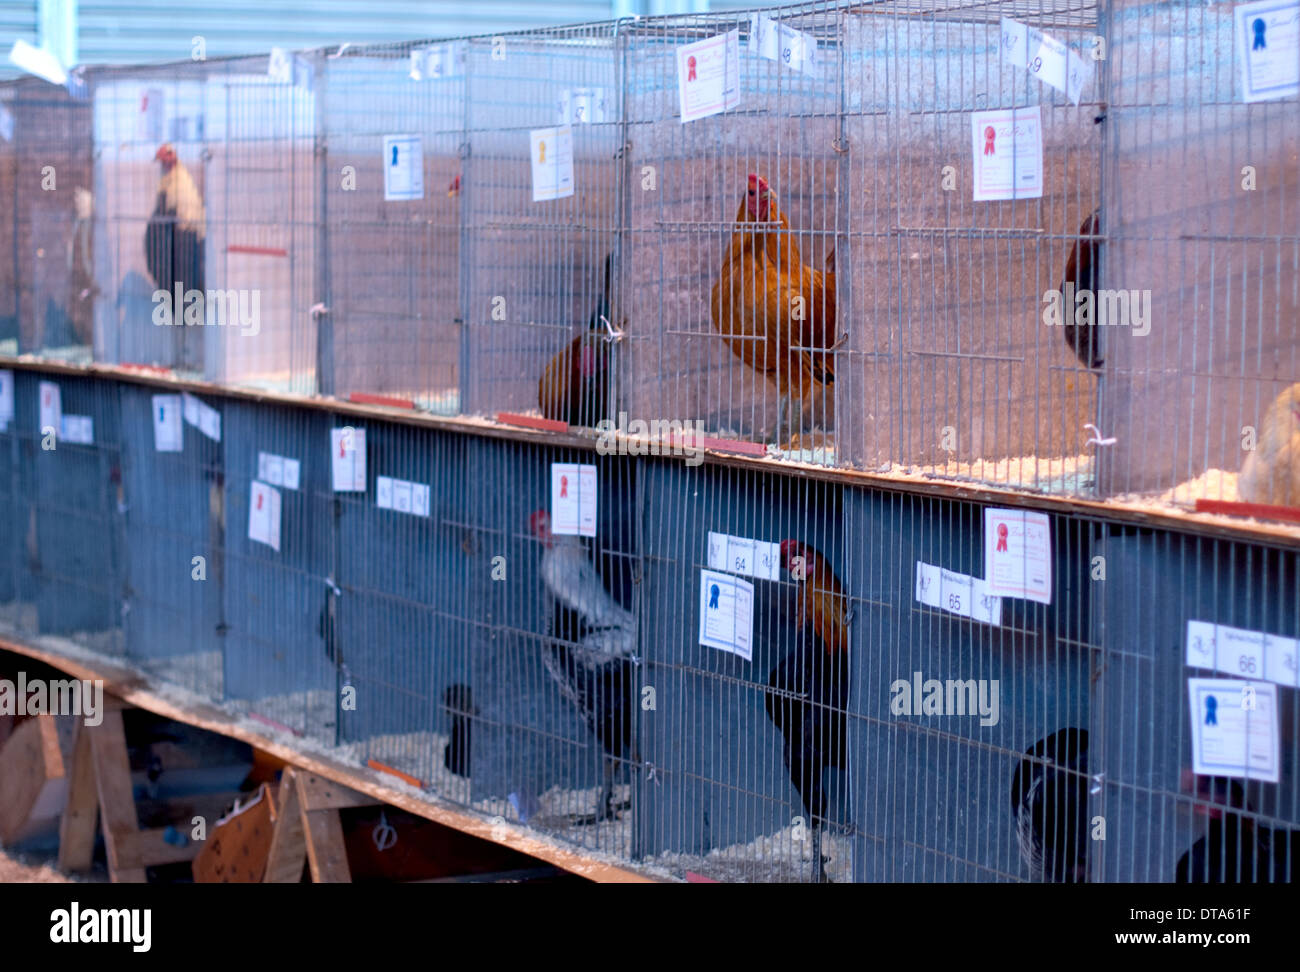 Chickens in cages at Poultry show Stock Photo